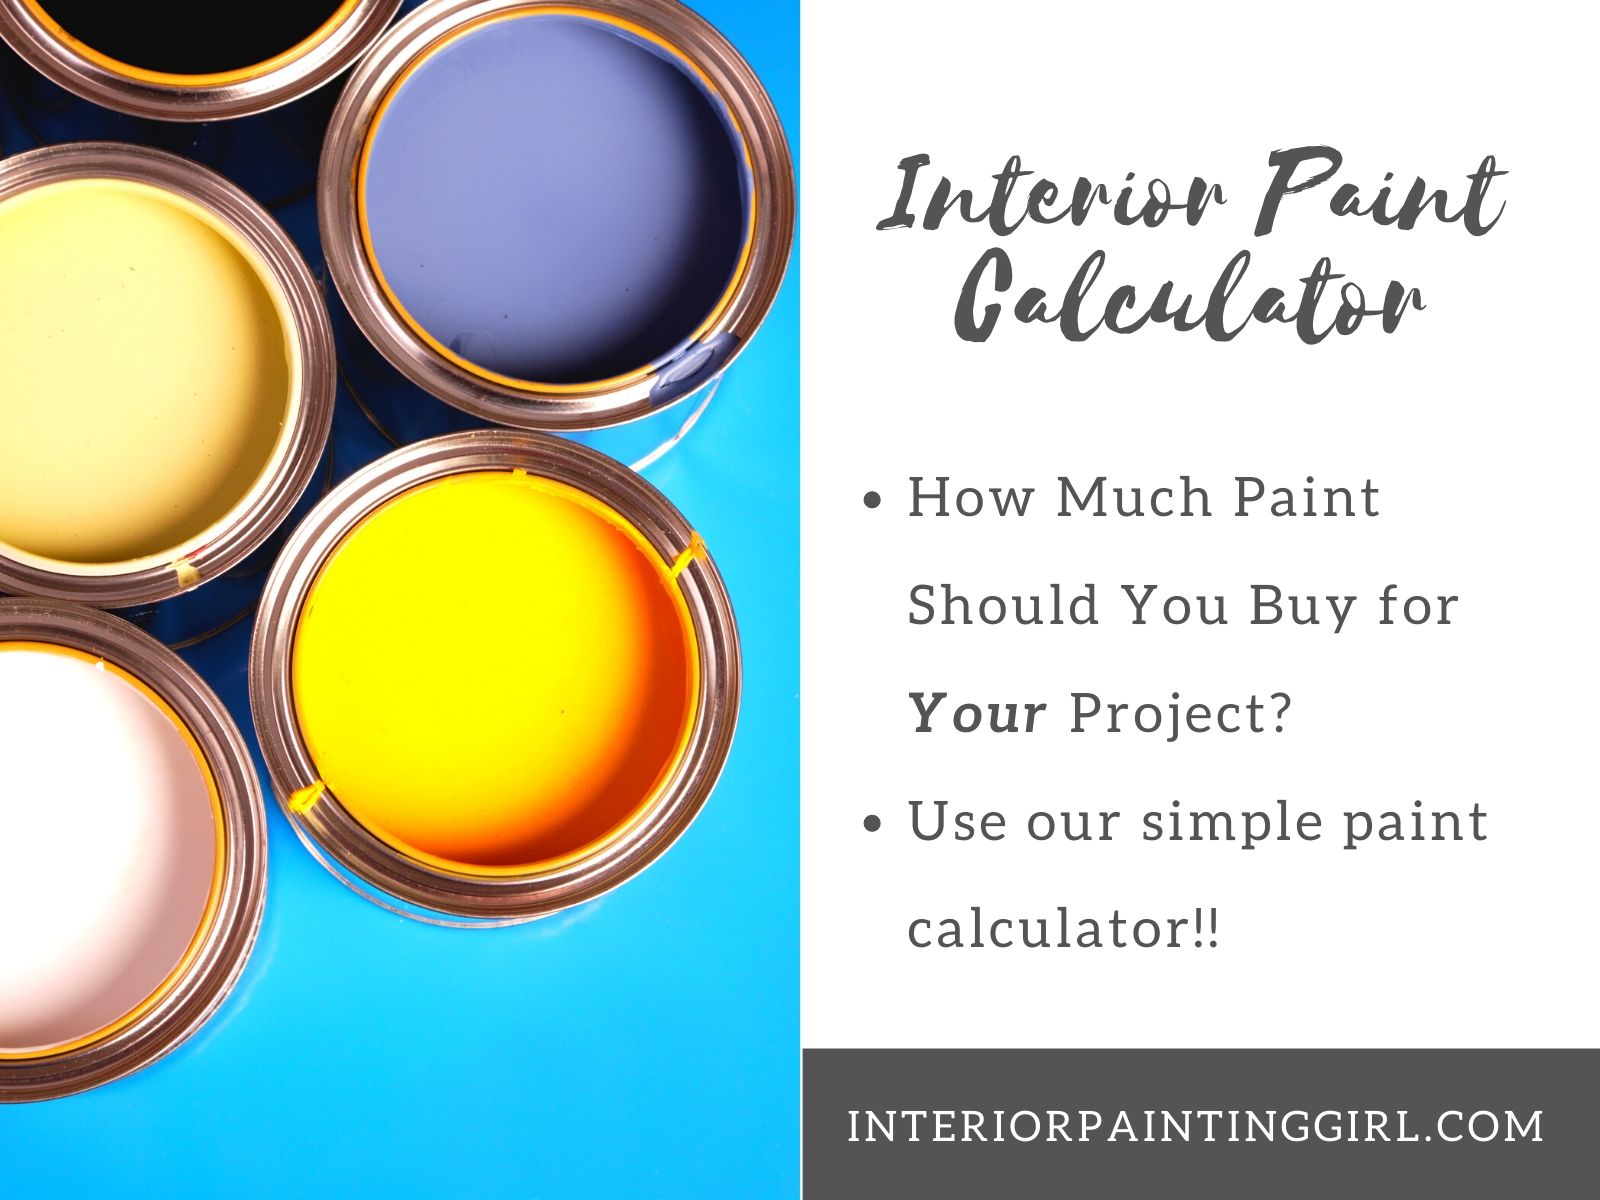 How Much Paint To Buy? Use our interior paint calculator to determine how much paint you need!